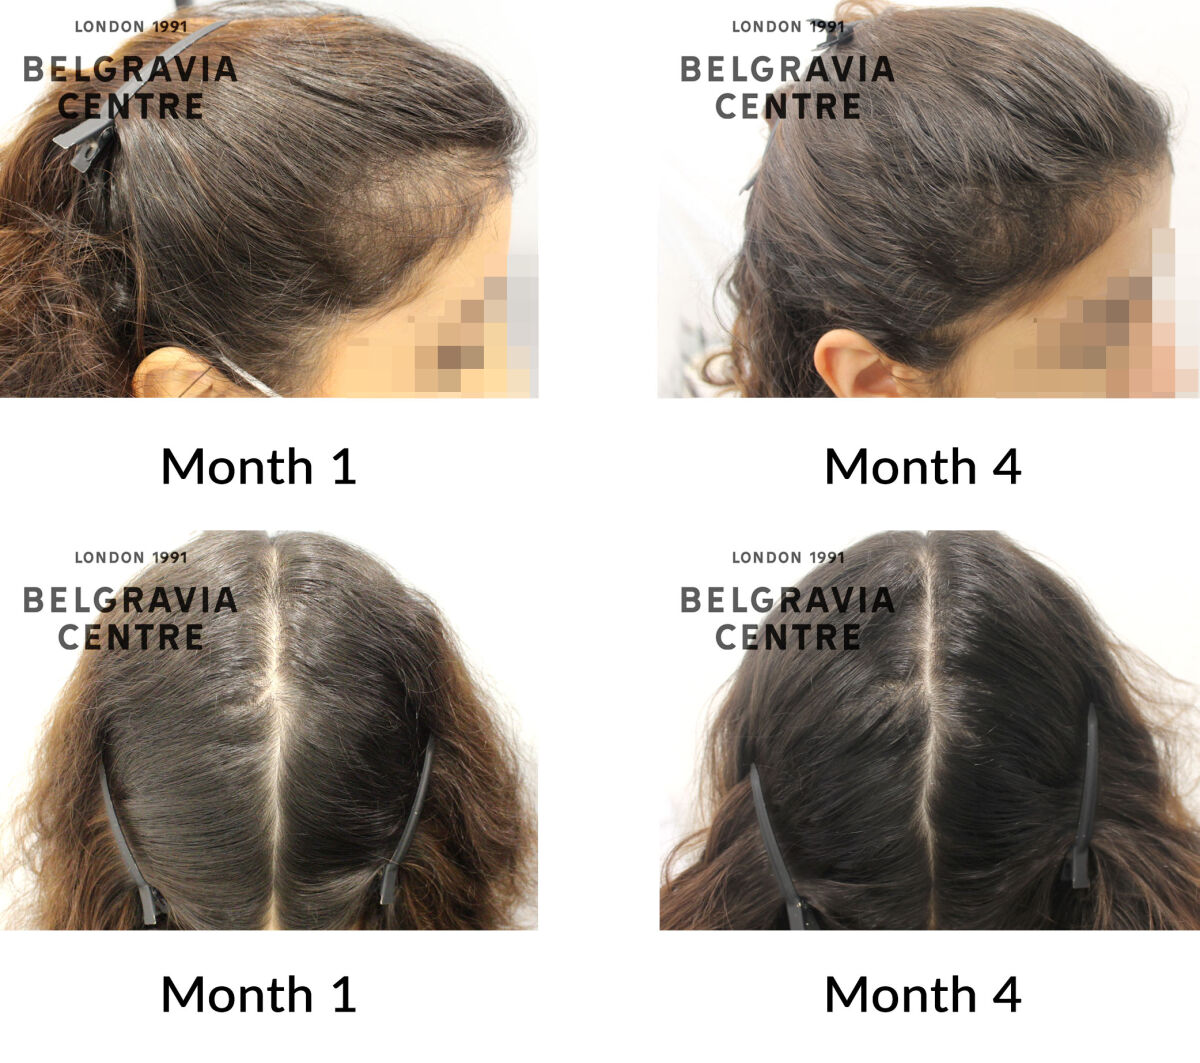 diffuse thinning and female pattern hair loss the belgravia centre 435195